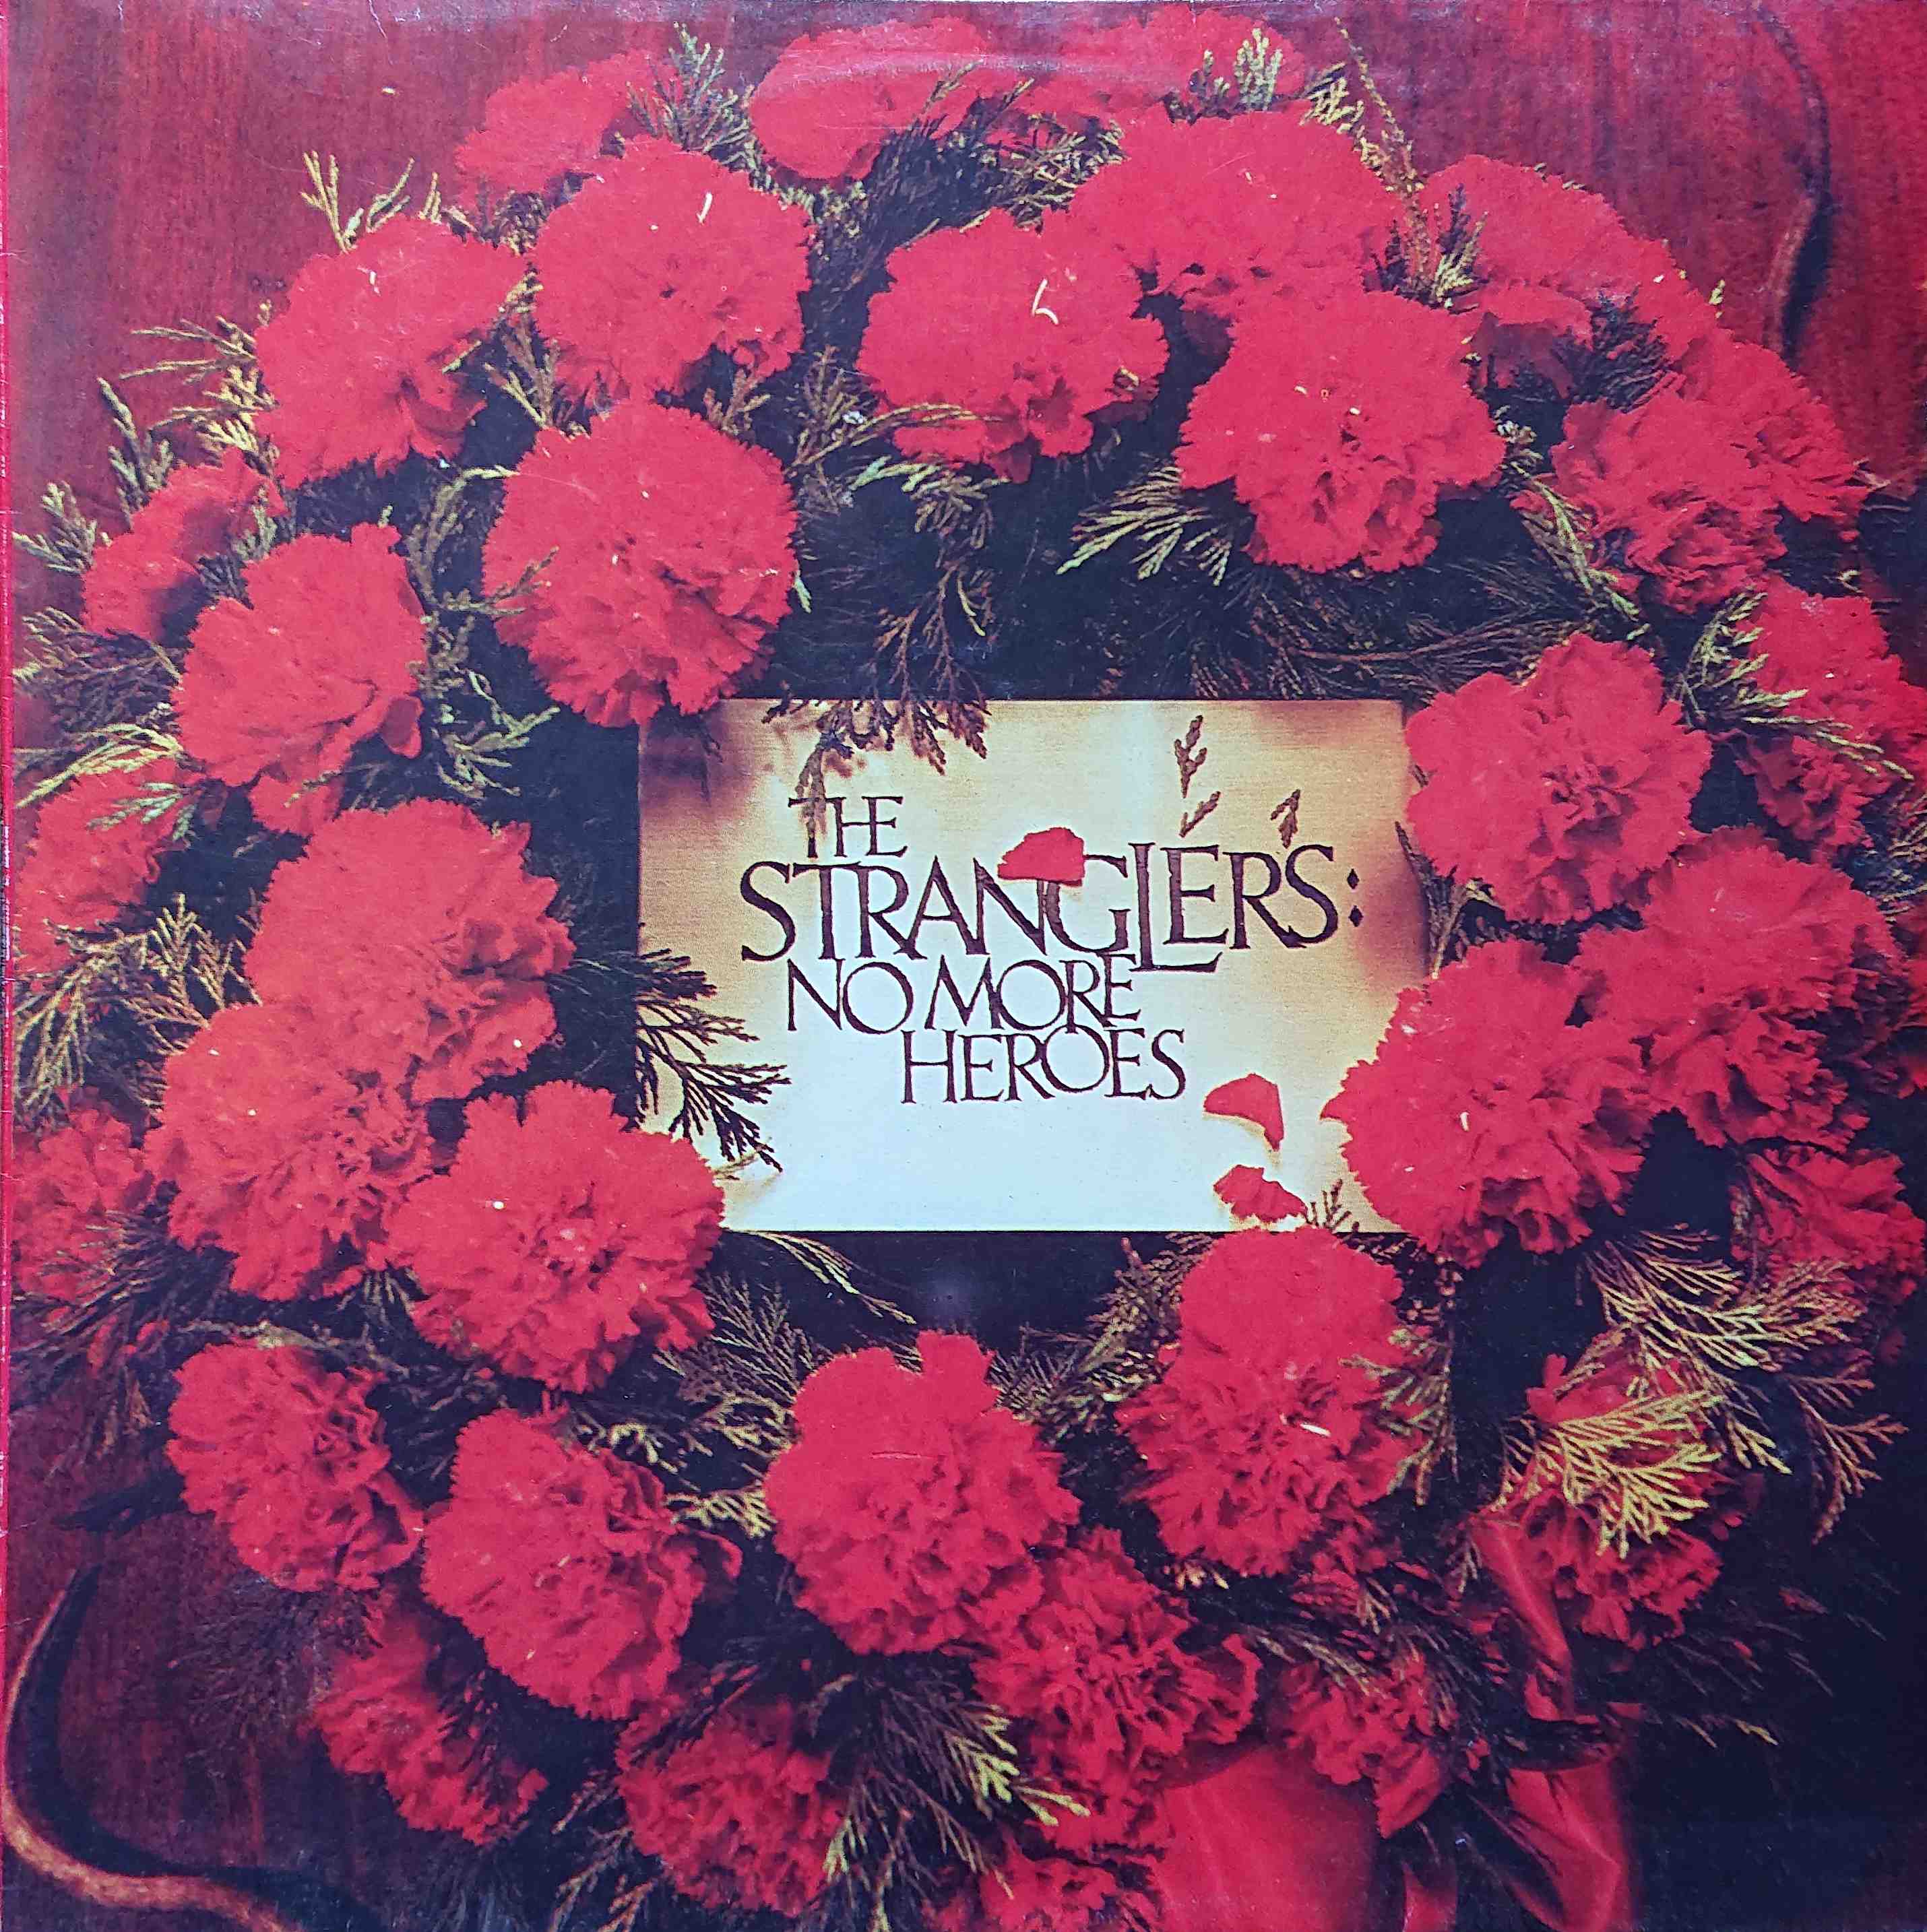 Picture of 062 - 1995601 No more heroes by artist The Stranglers from The Stranglers